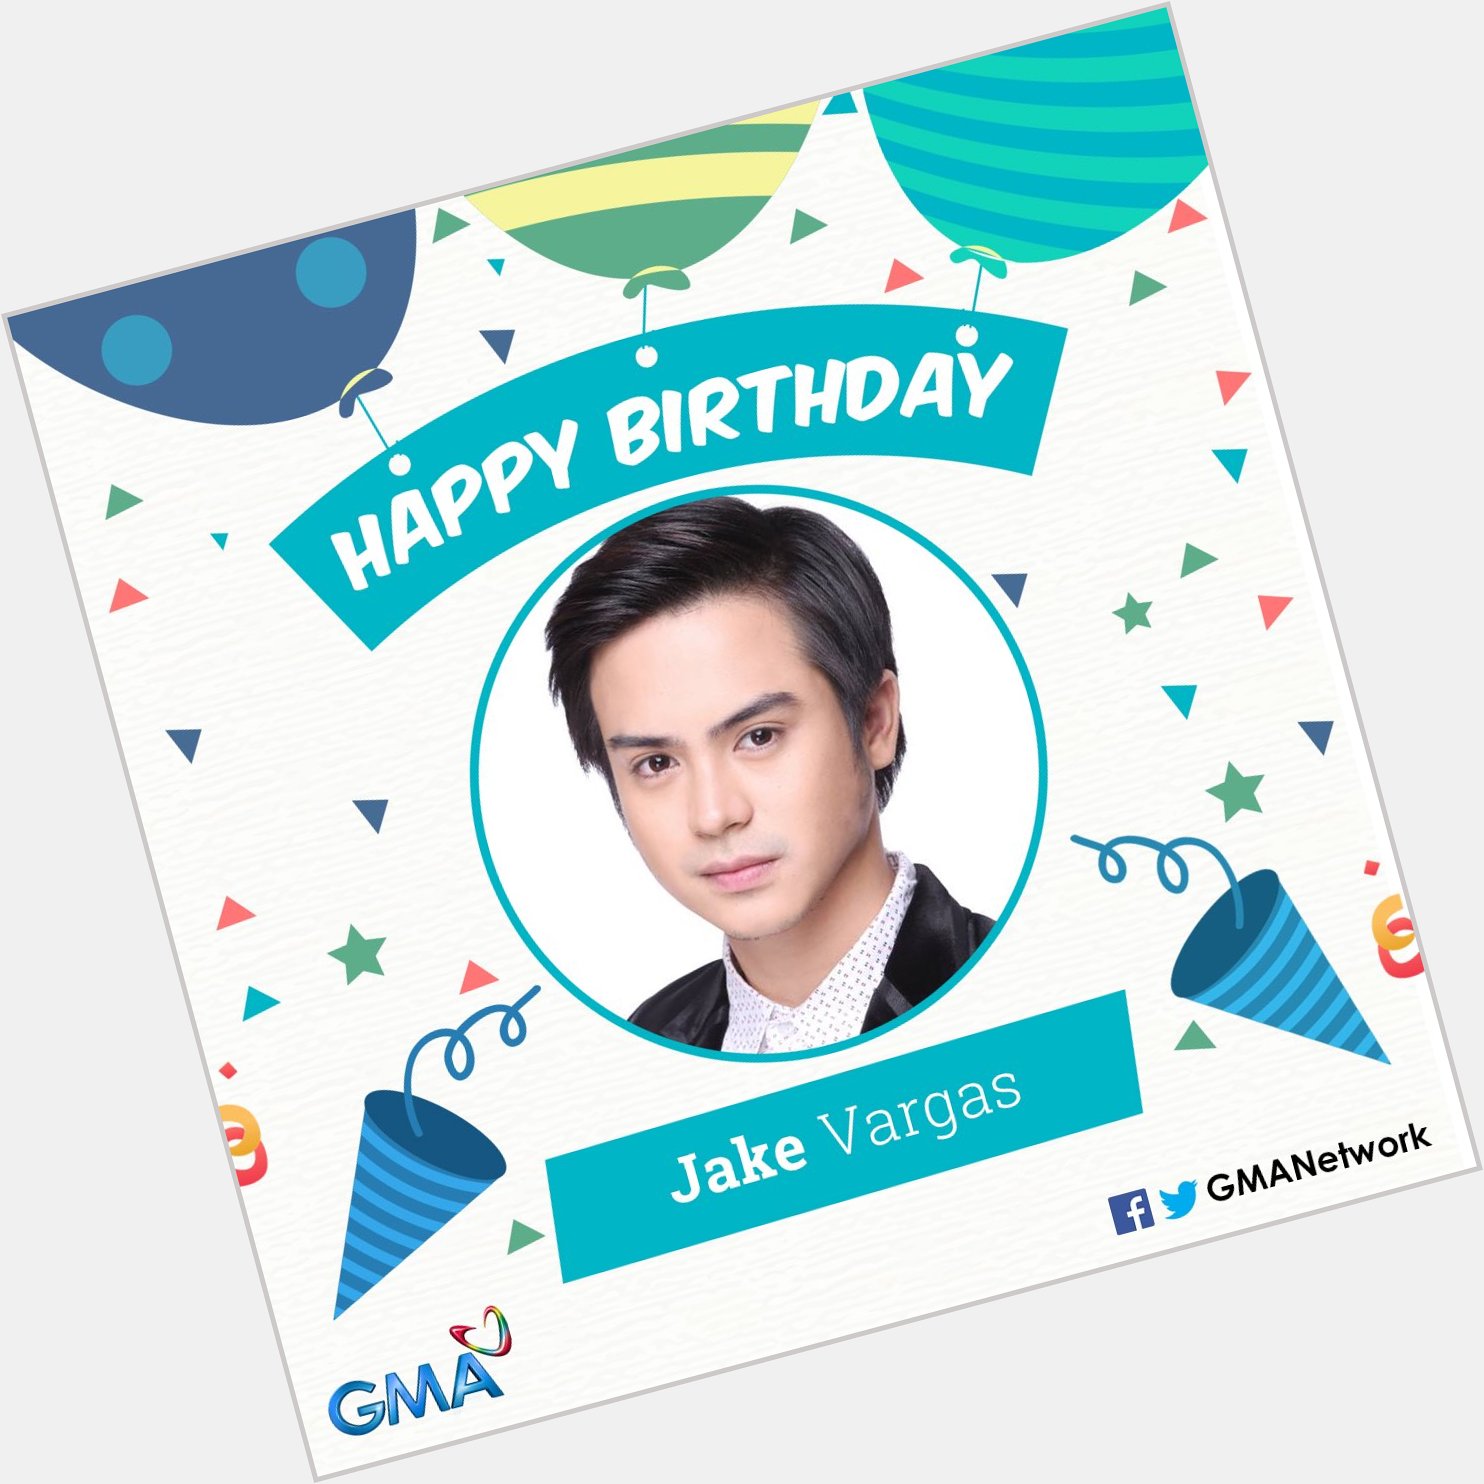 Happy birthday Chito / Jake Vargas! 

May all your birthday wishes come true  